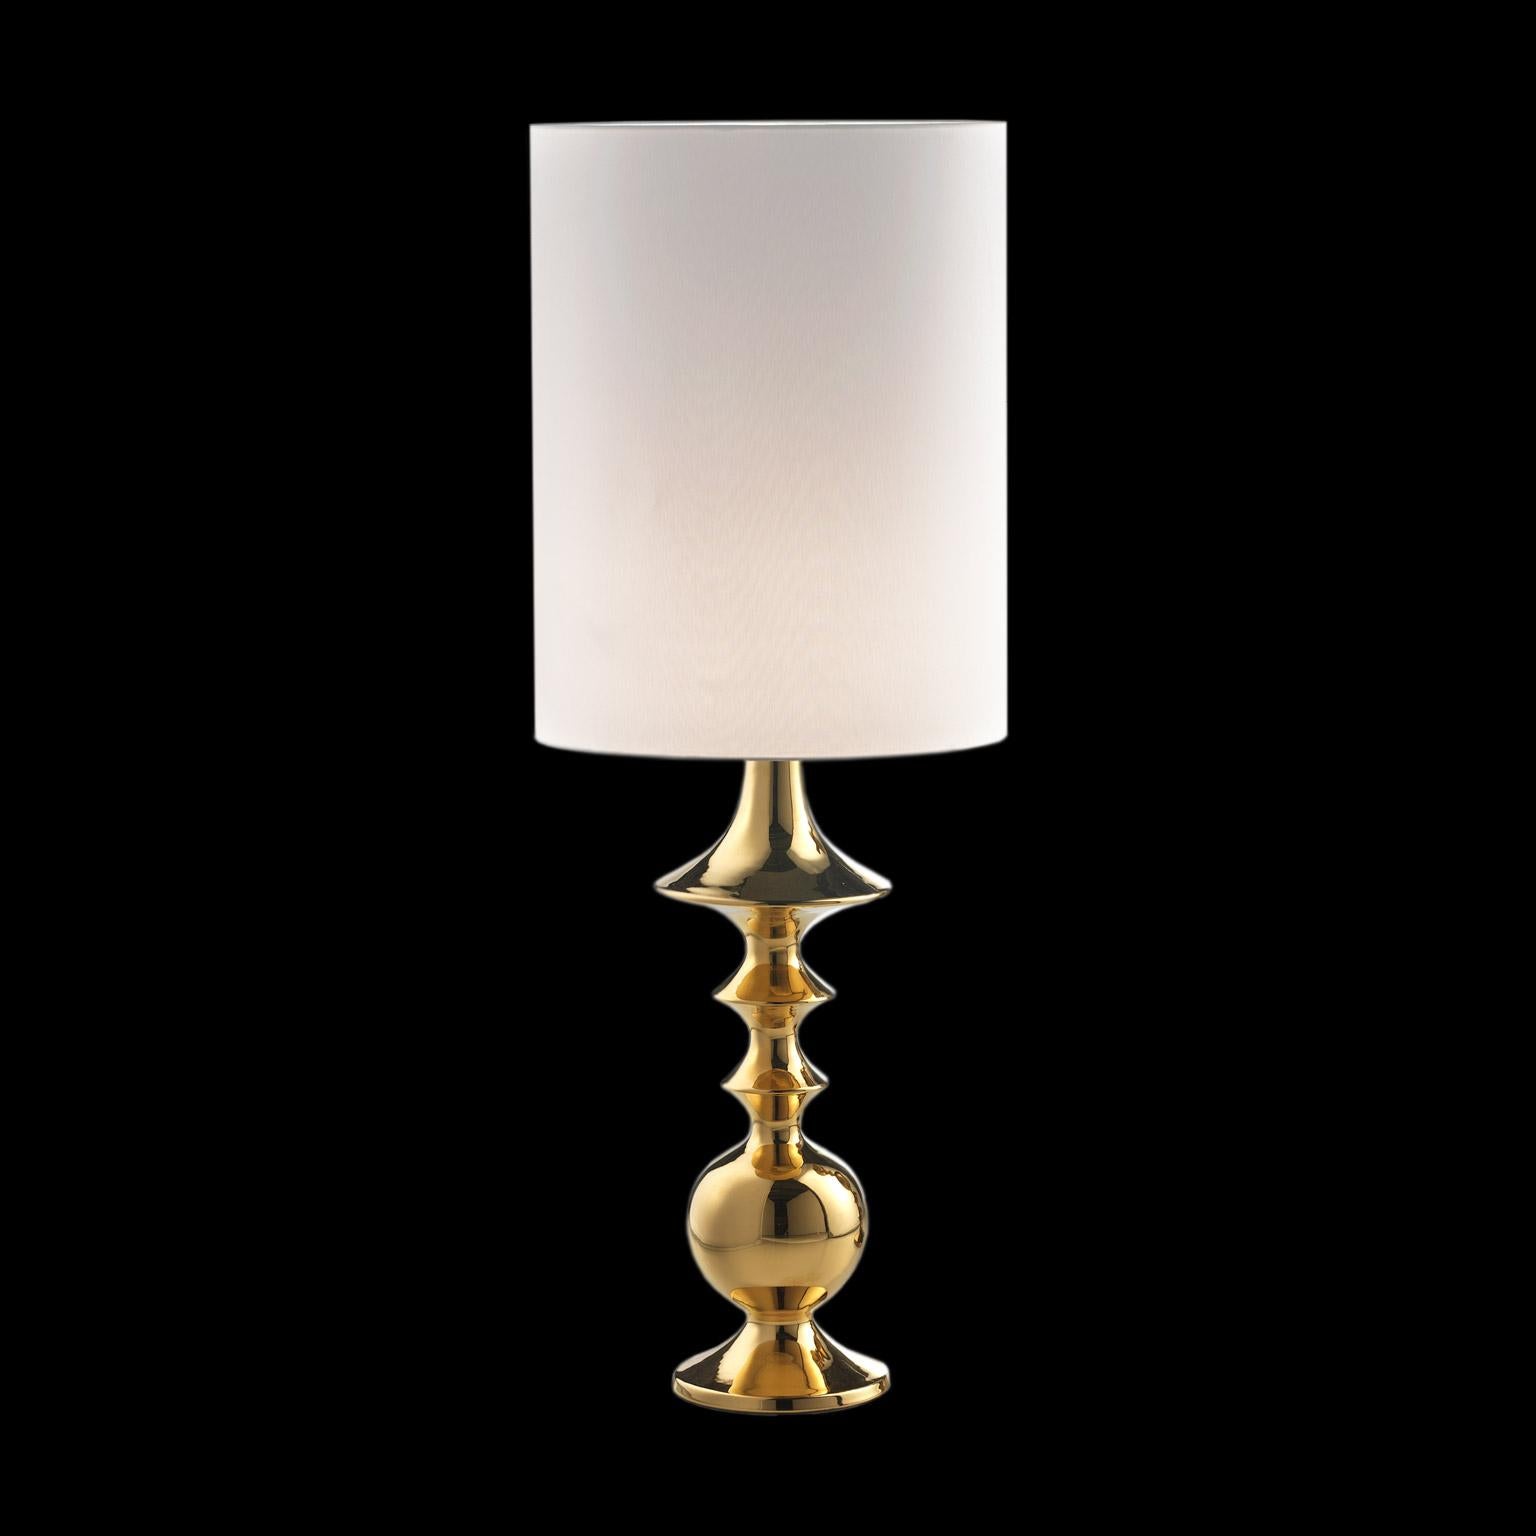 Ceramic lamp BRIX handcrafted in 24-karat gold with cotton lampshade

cod. LB001 
measures: H. 90.0 cm. - Dm. 40.0 cm.